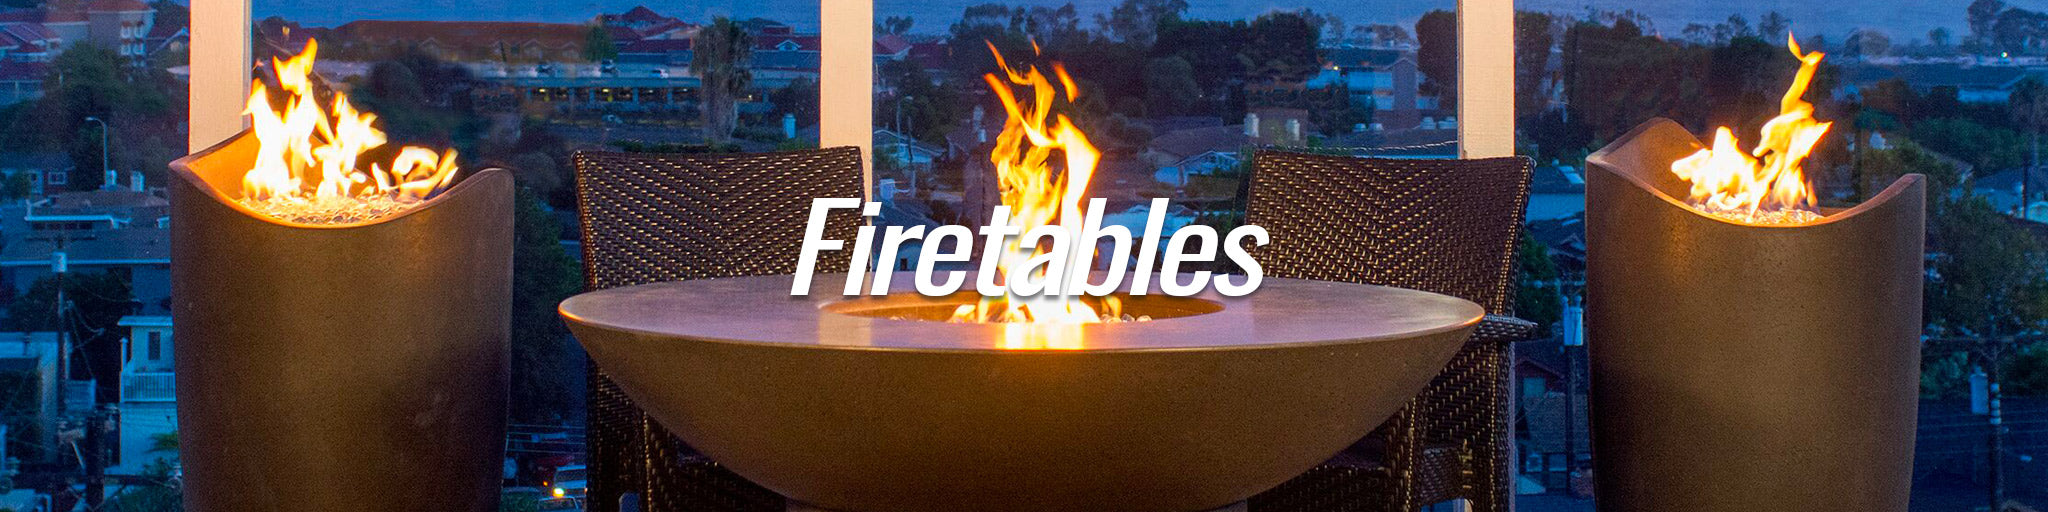 FIRETABLES&OUTDDOR-OCCASIONAL-SUBBANNER